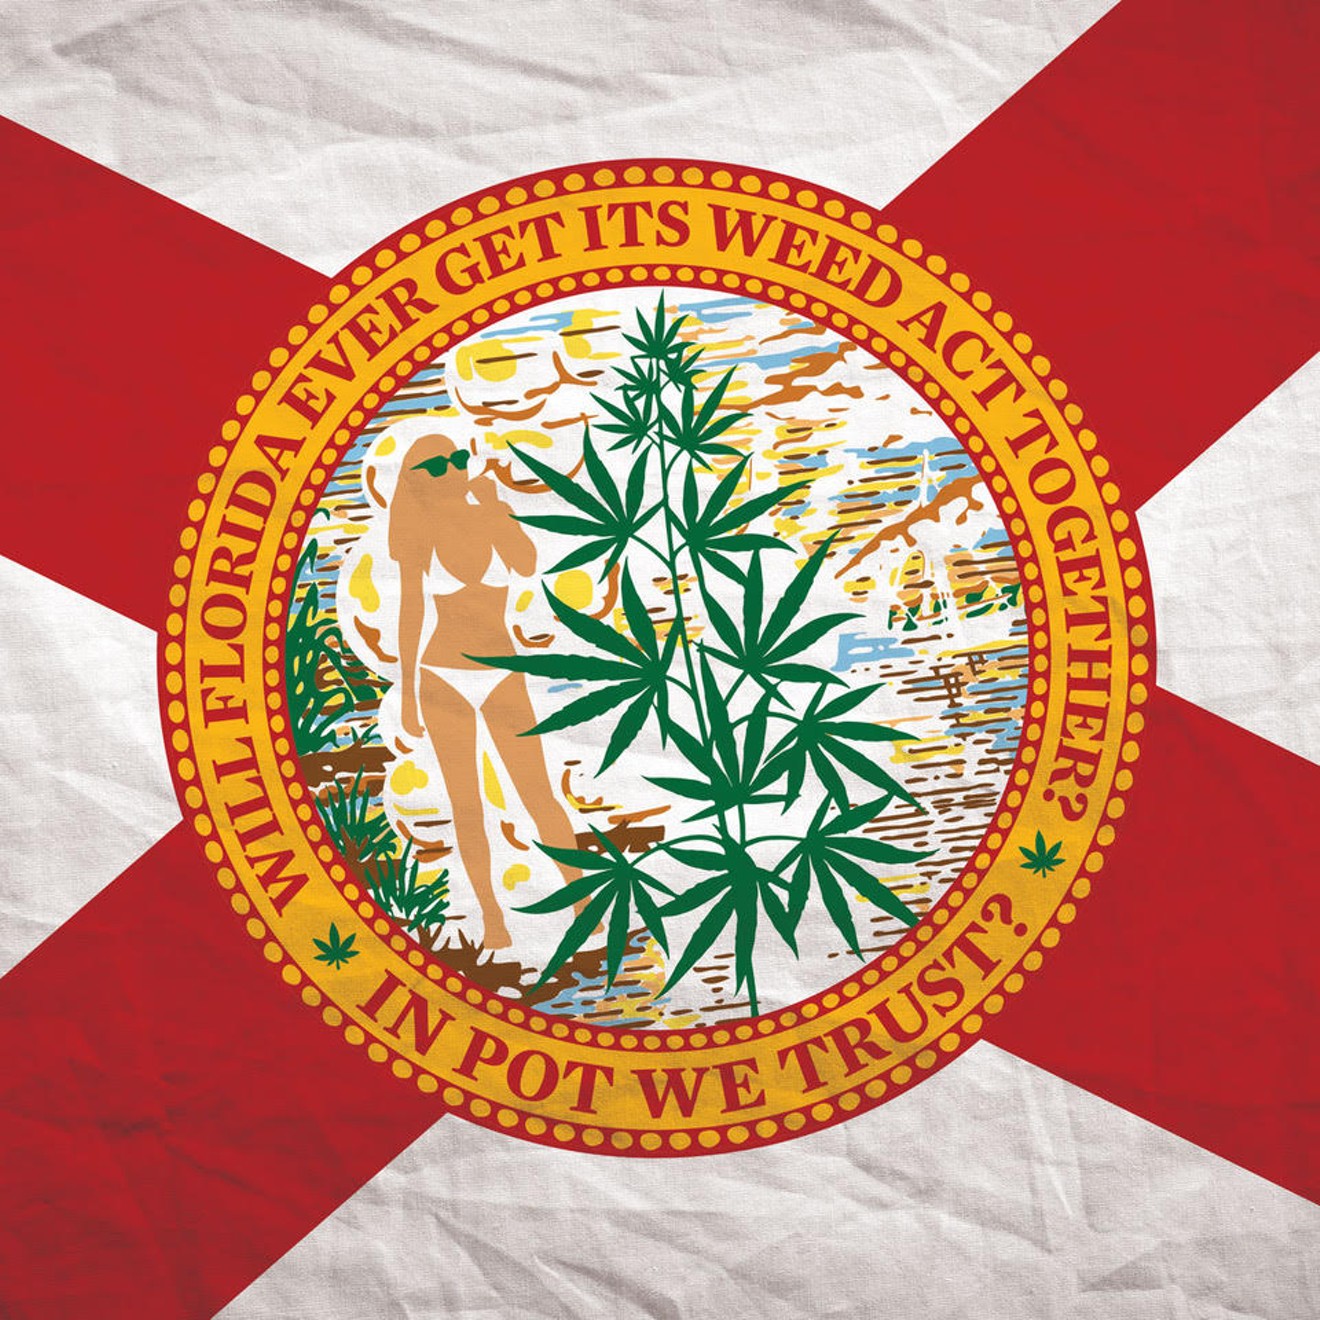 Will Florida ever get its weed act together?